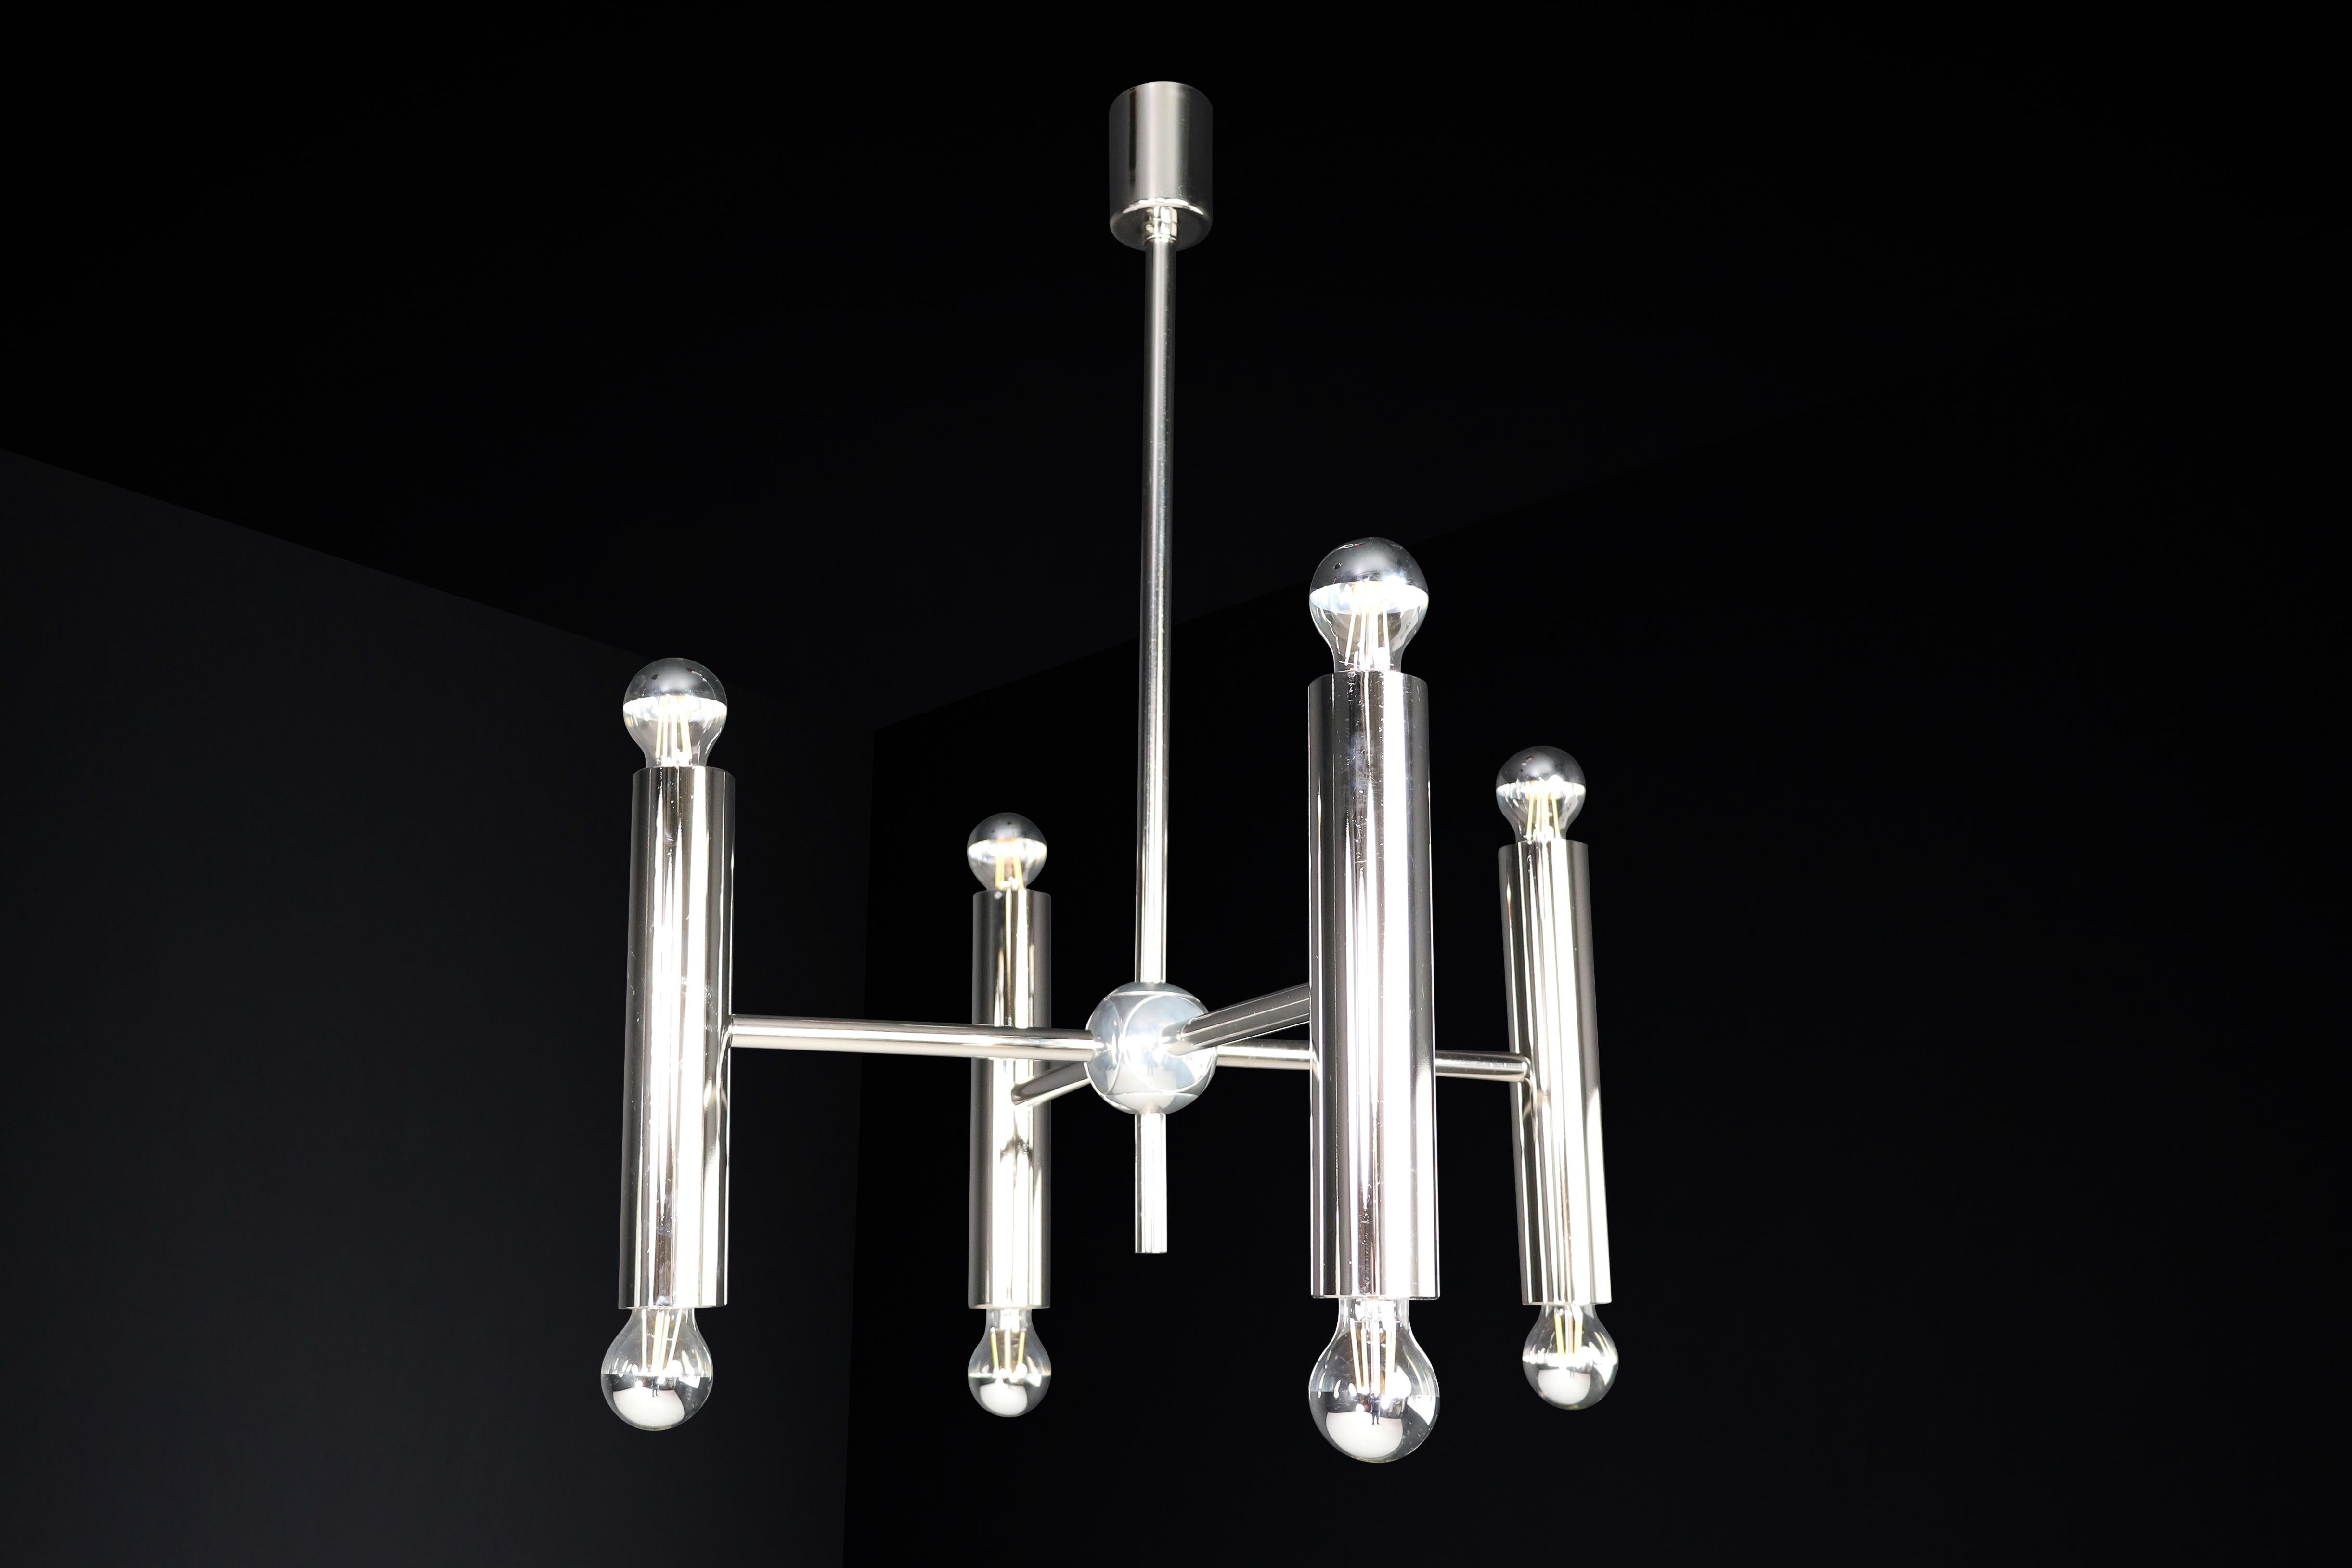 Mid-Century Modern chandelier in polished steel with eight lights, made in Germany in the 1960s.

This is a stunning midcentury chandelier from Germany, made in the 1960s. It boasts a polished steel frame and four tubes held together by steel. Each